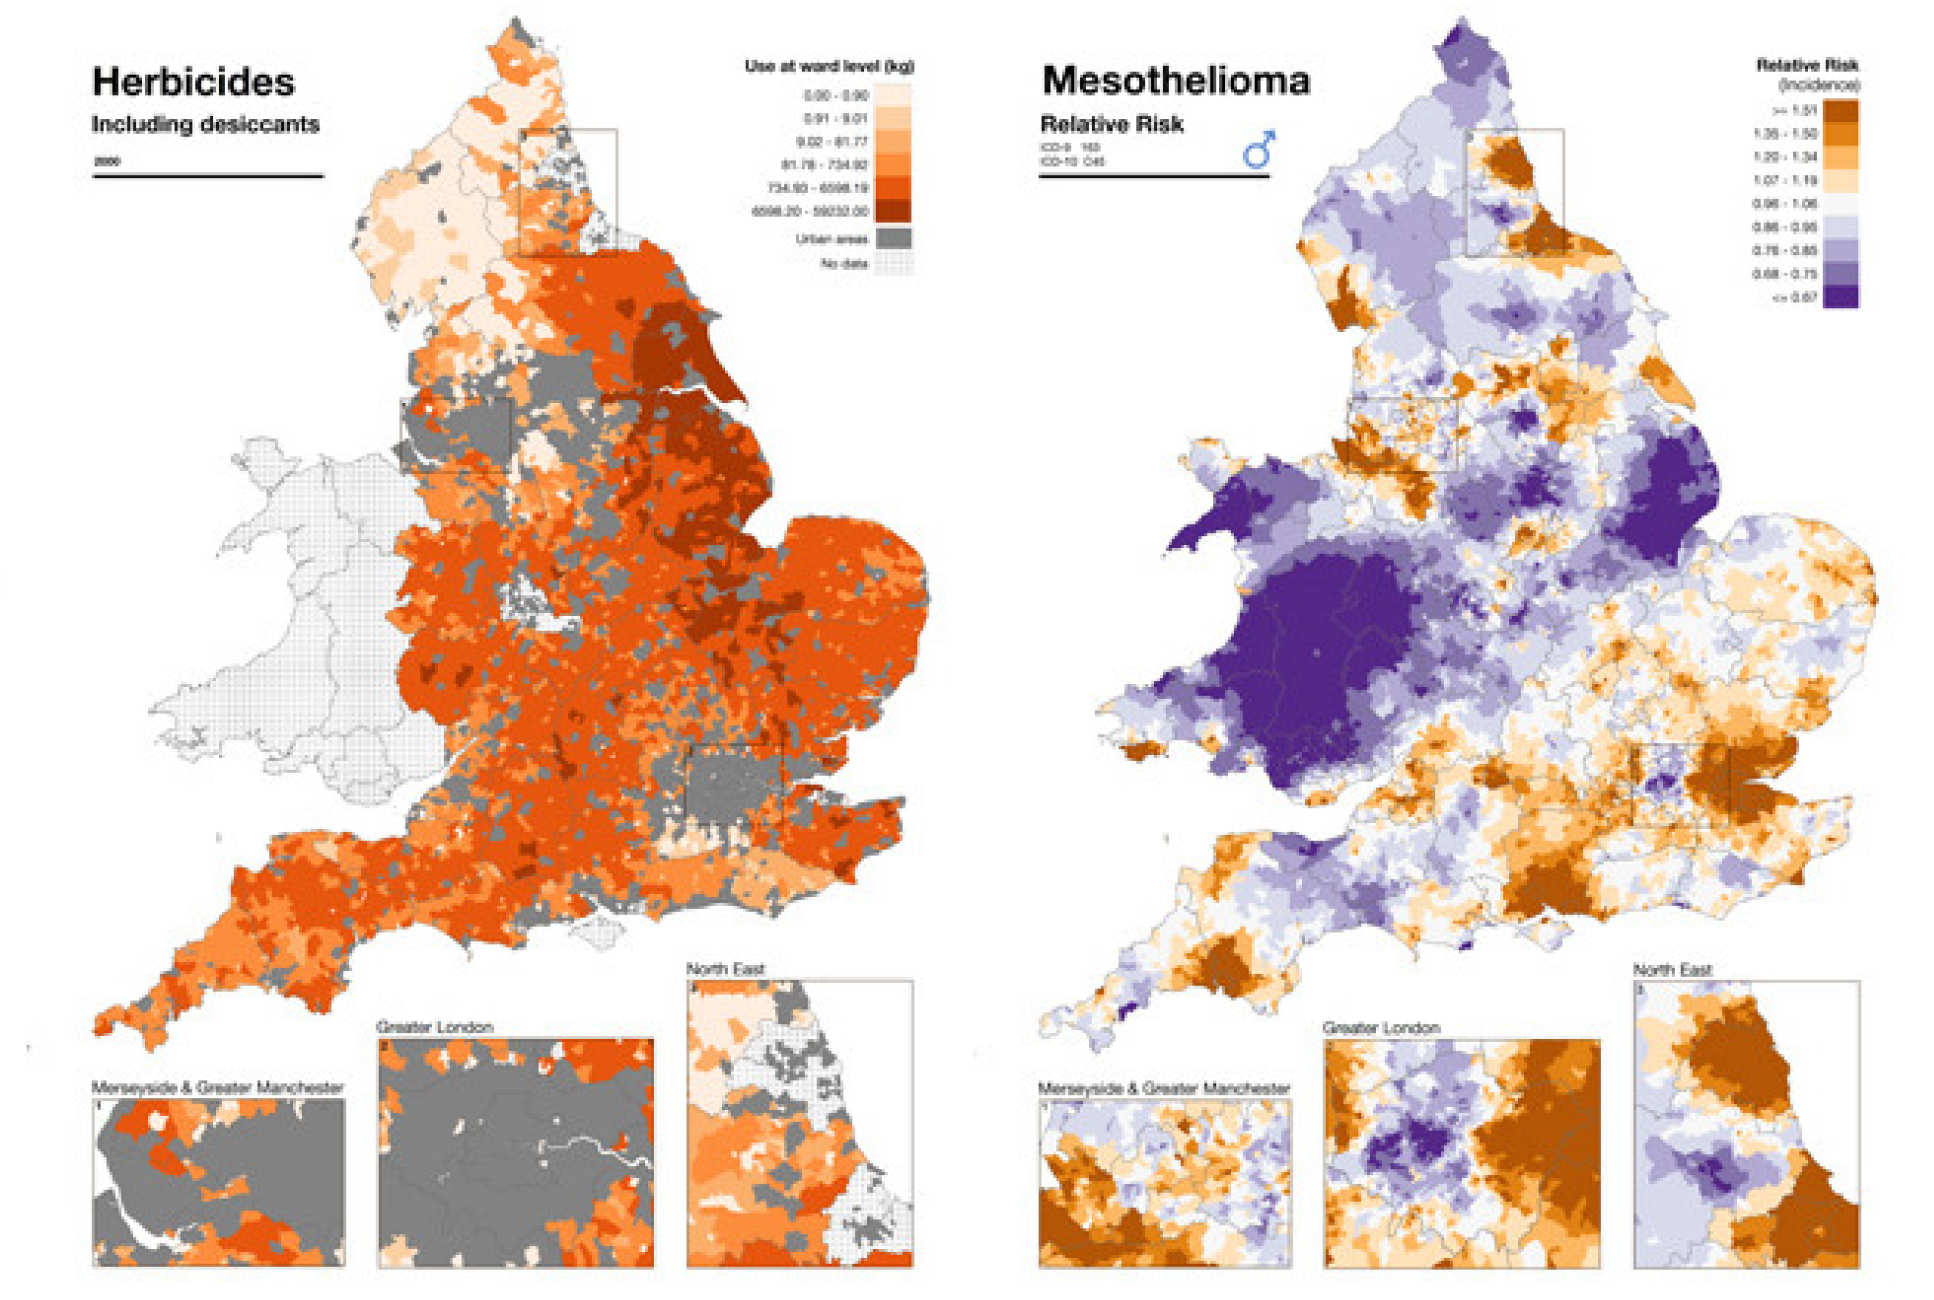 Atlast maps showing prevalance of herbicides and relative risk of mesothelioma